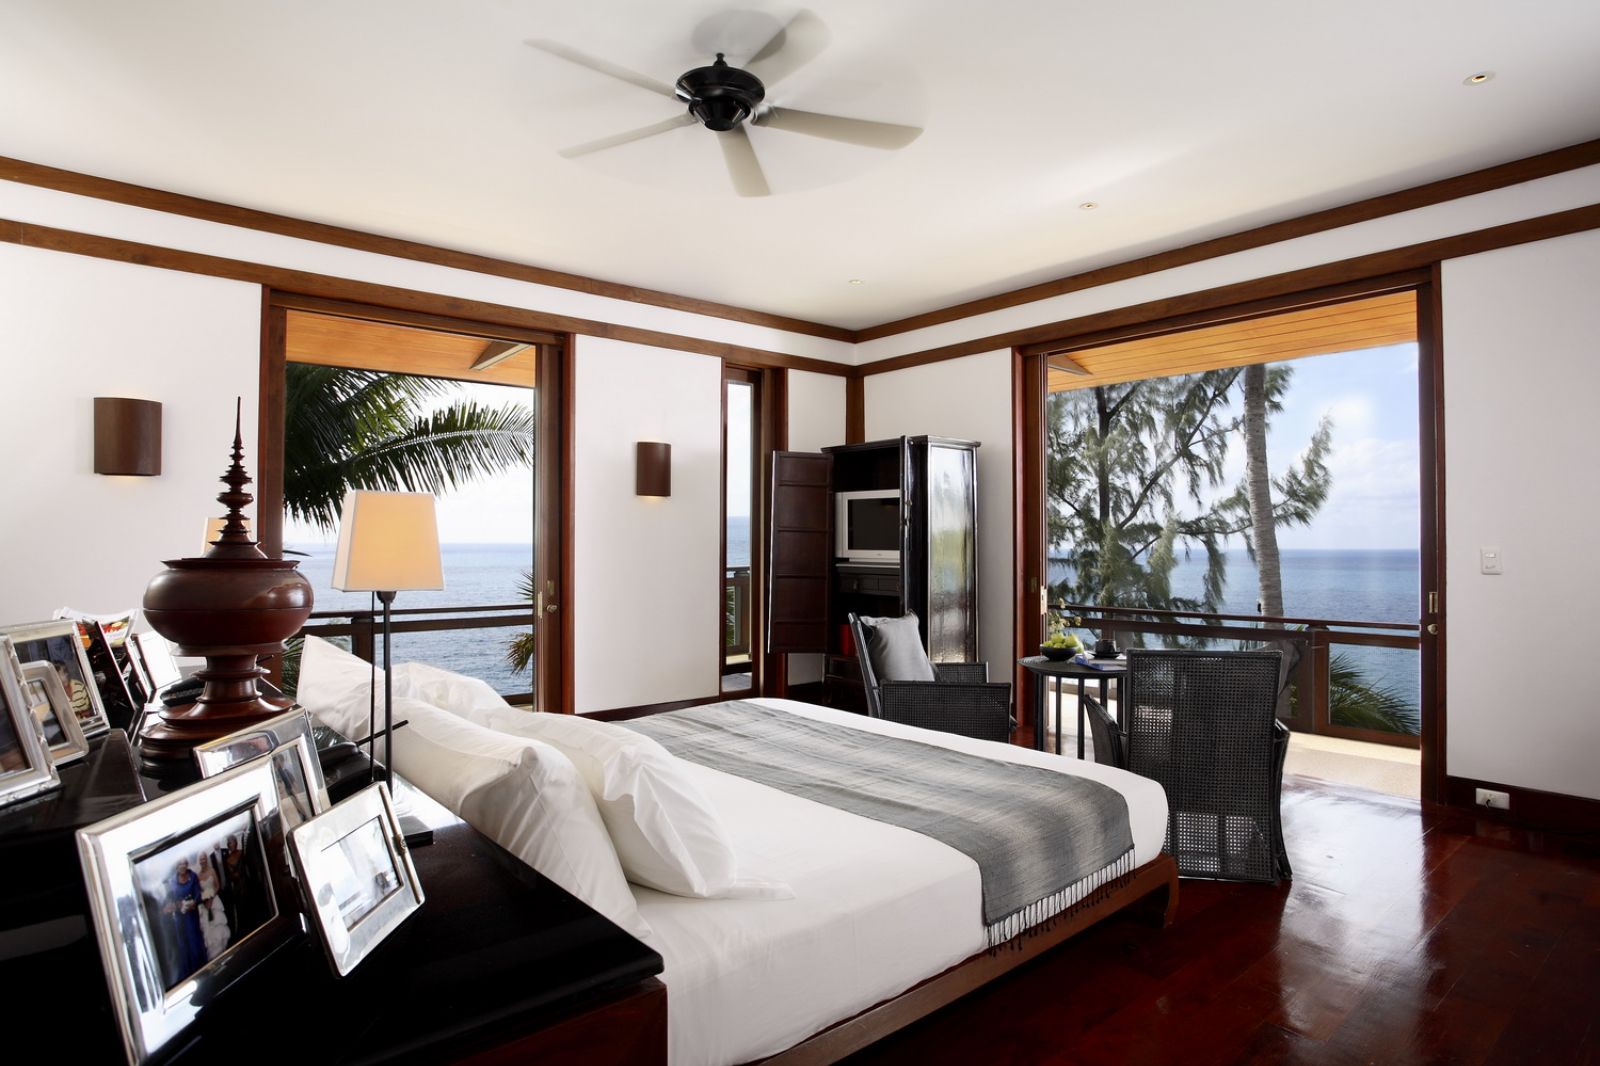 Ocean view suite at Villa Laemson on the island of Phuket in Thailand